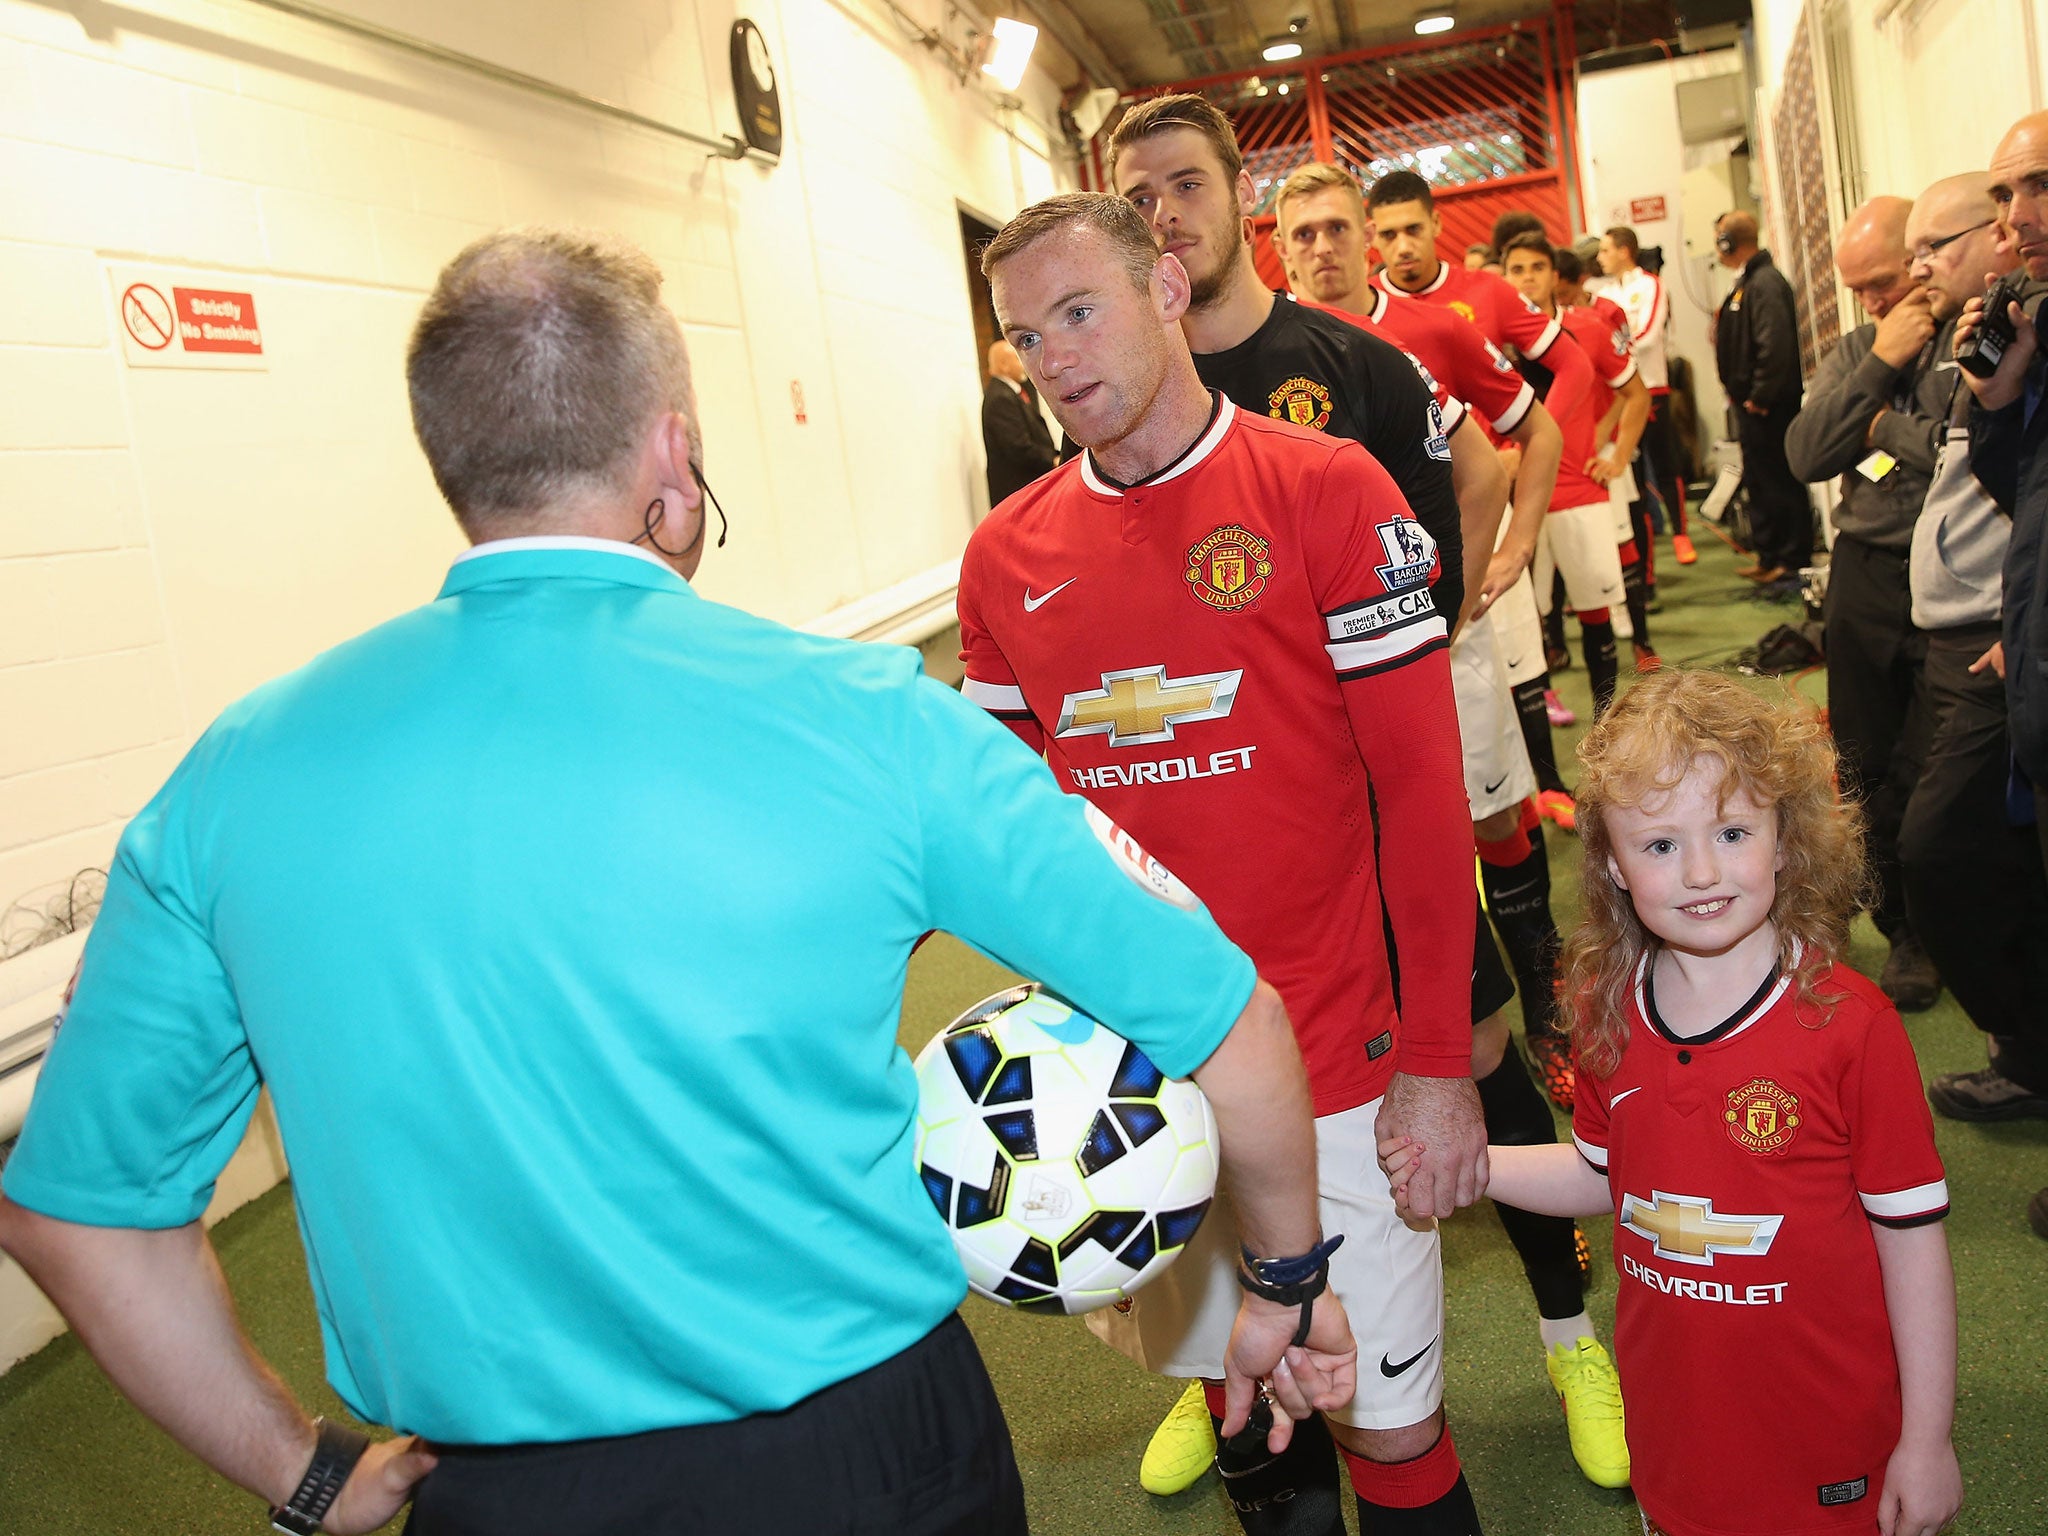 Wayne Rooney has spoken of the great honour of being named Manchester United captain